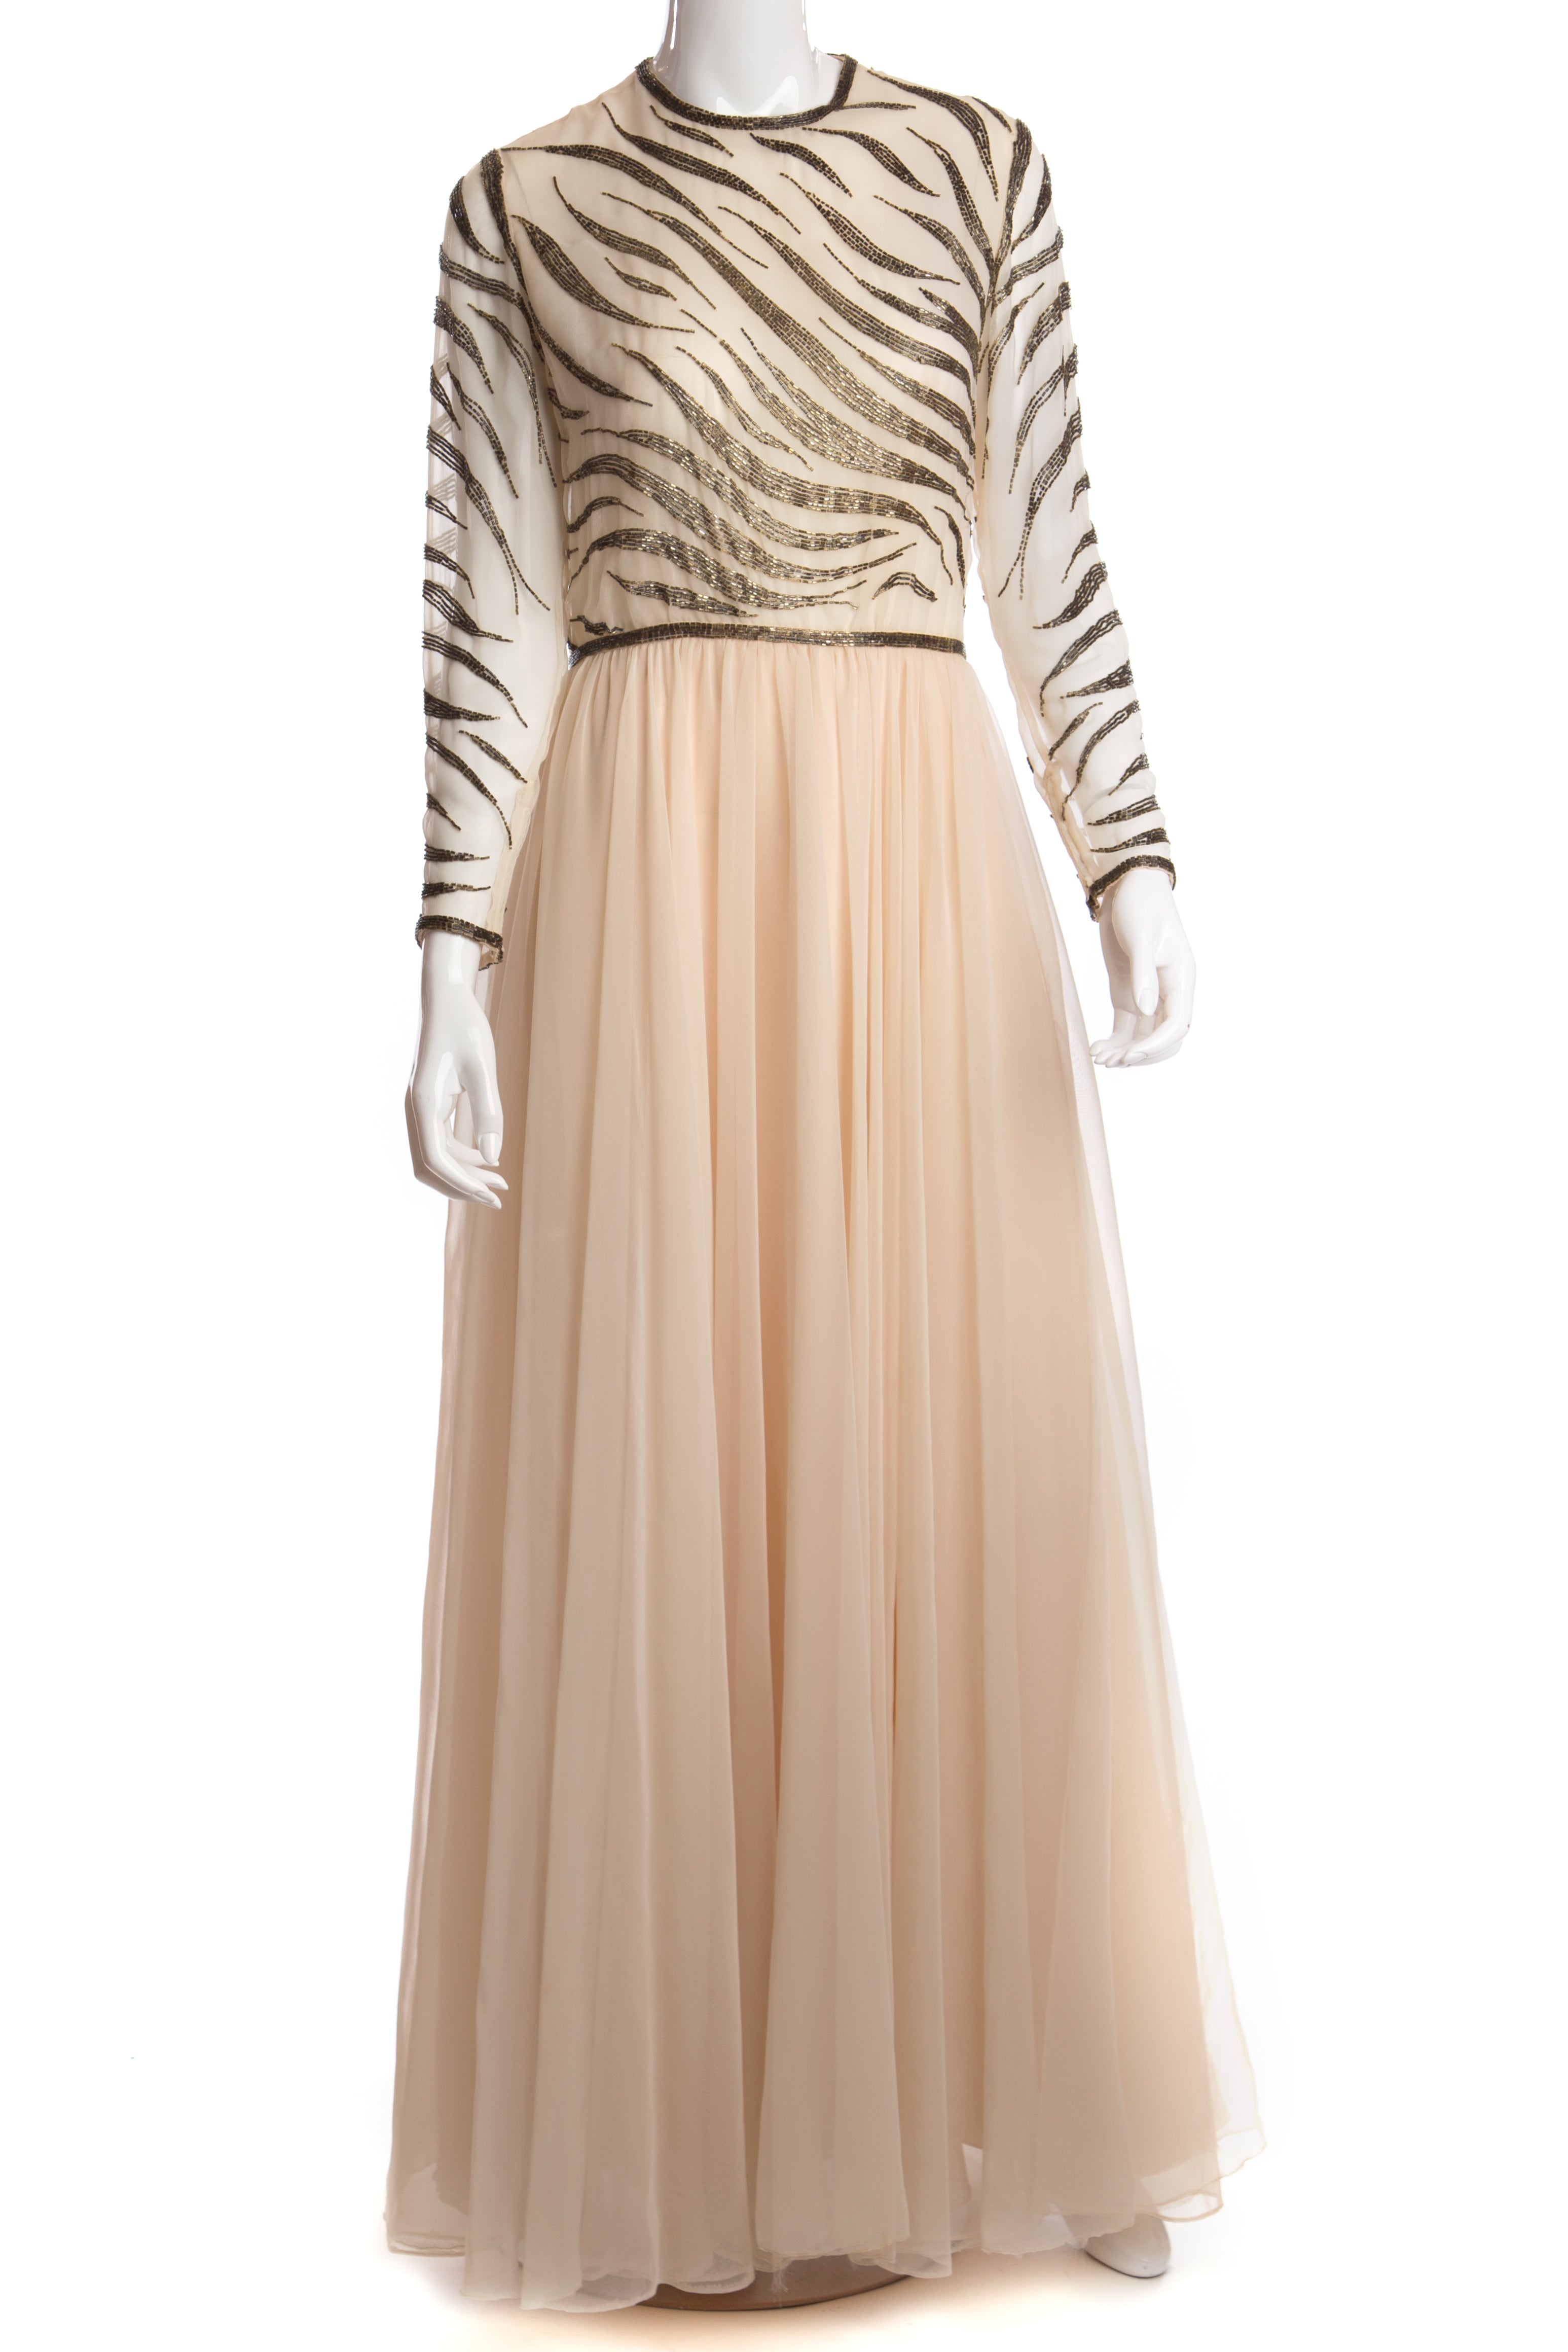 Vintage - Chiffon, Beaded Evening Gown